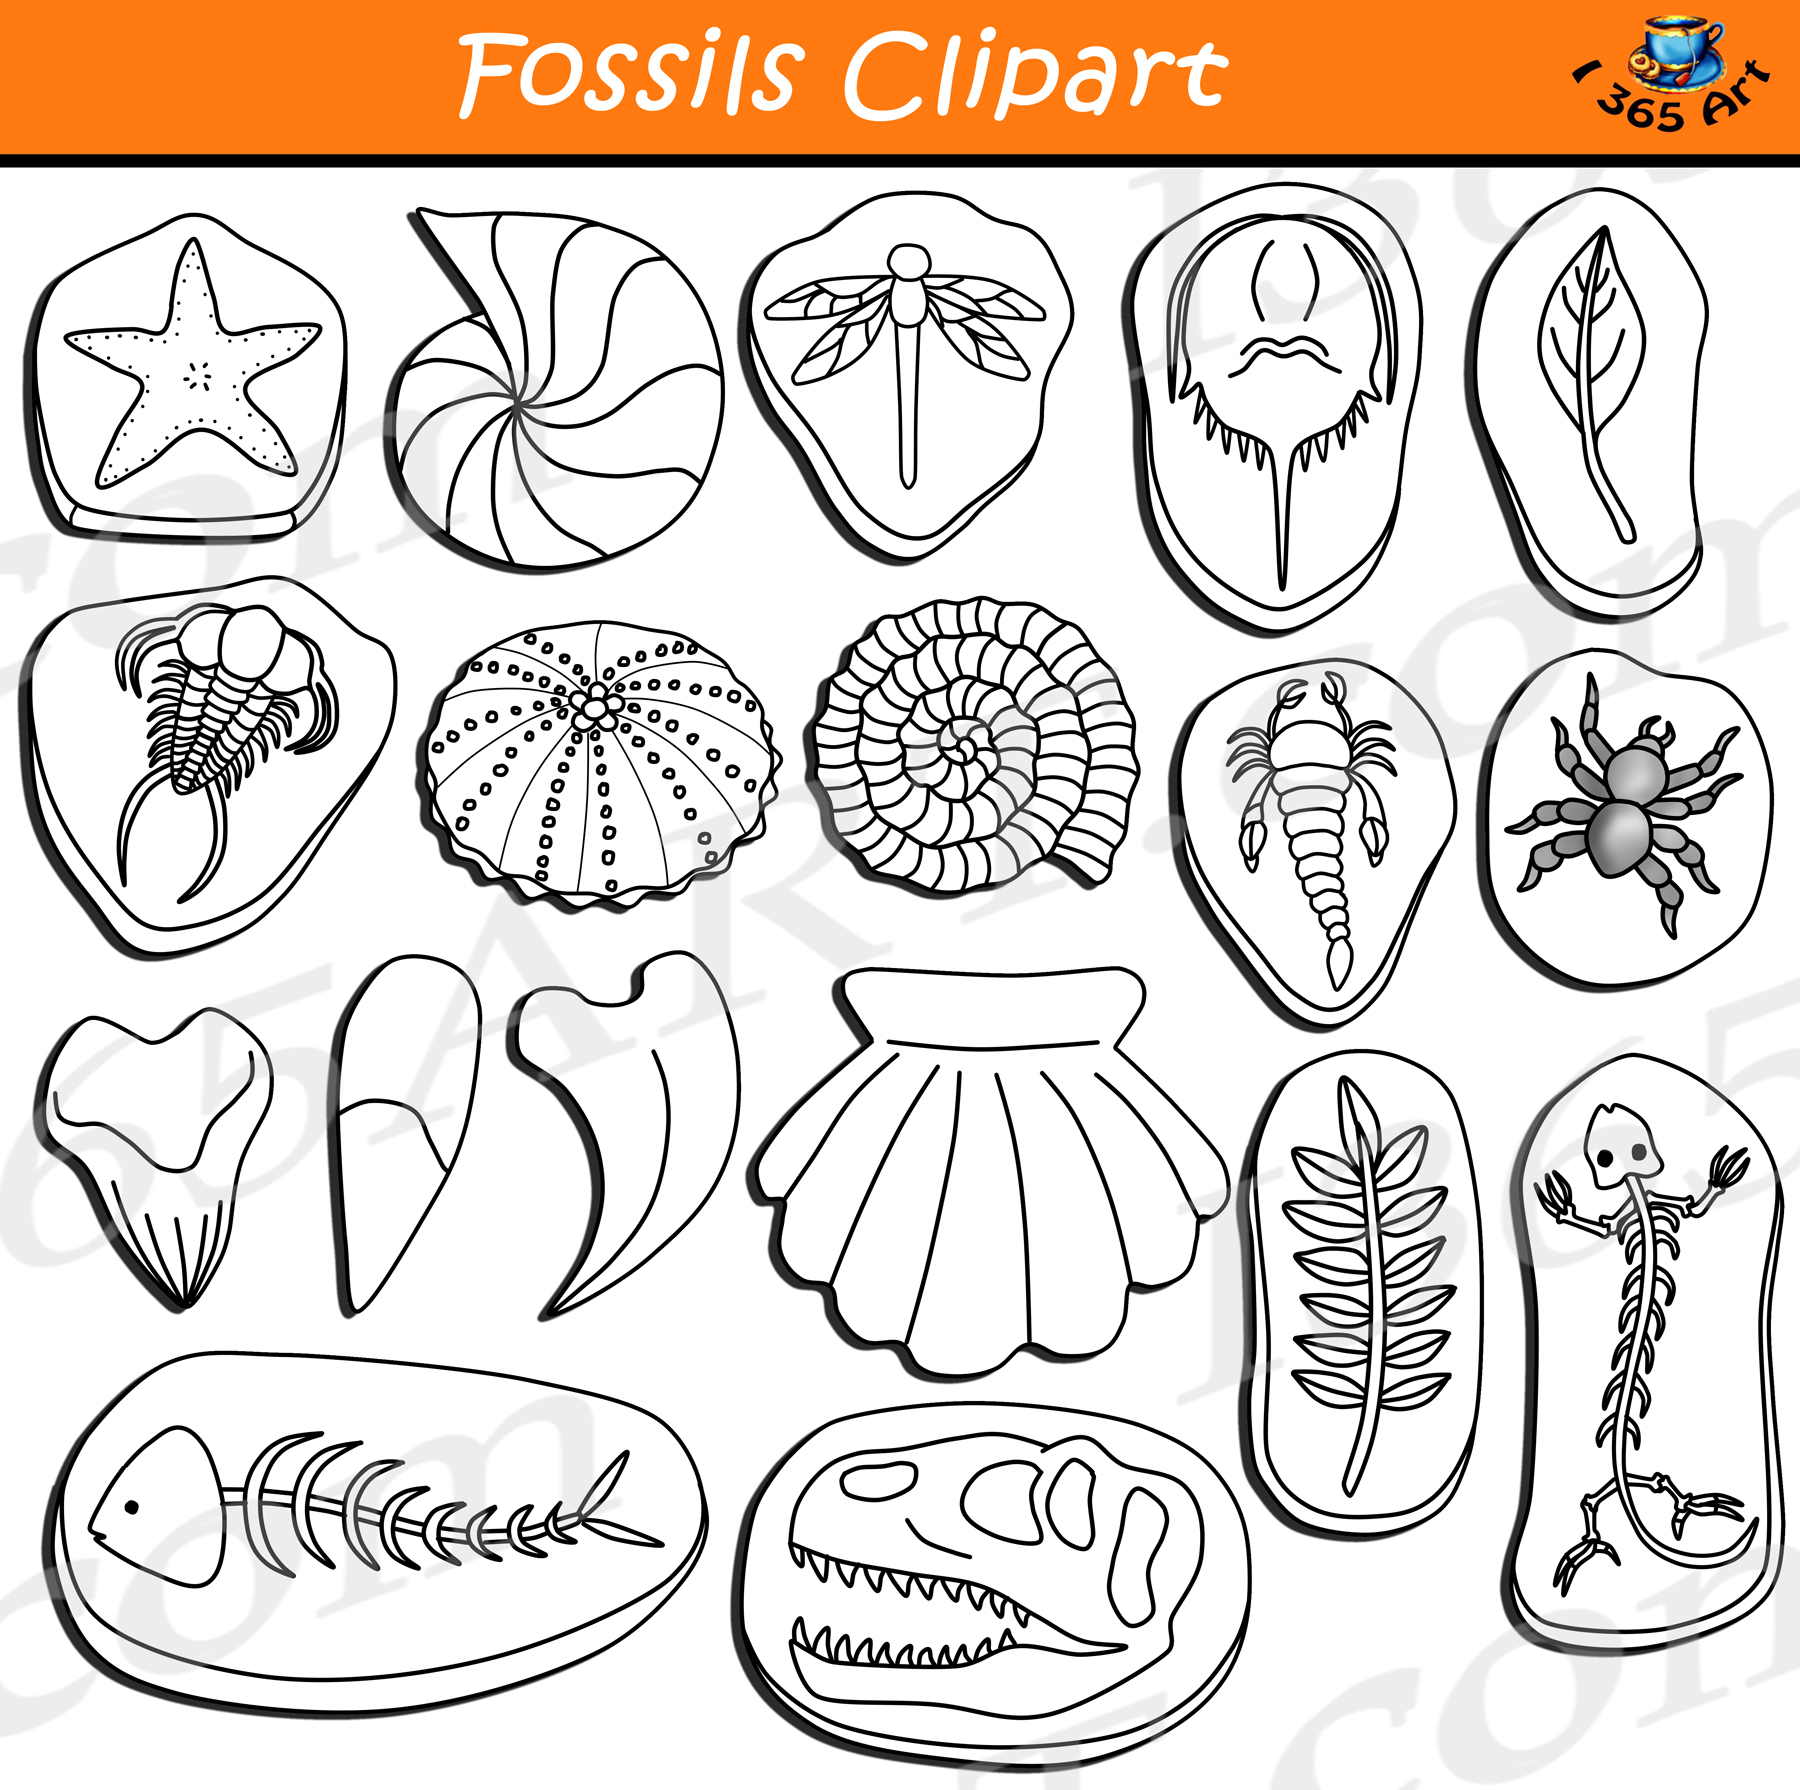 Fossils download earth science. Fossil clipart history